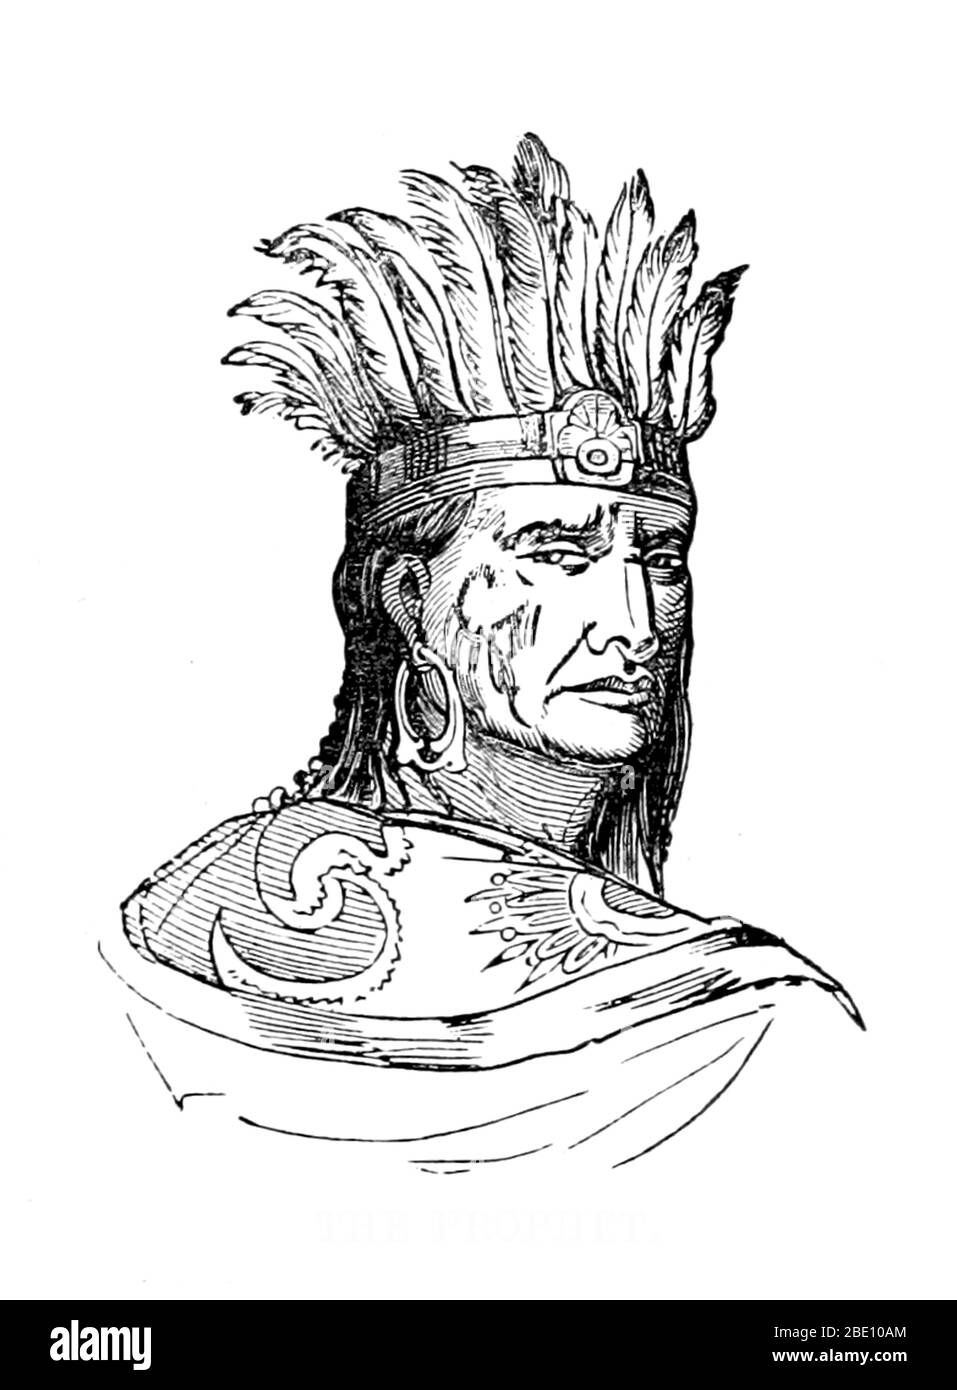 Image taken from page 71 of 'Illustrated Historical Sketches of the Indians' by John Frost, 1857. Tenskwatawa (March 1768 - November 1836) was a Native American religious and political leader of the Shawnee tribe. He led a purification movement to return his people to their traditional ways, and to extirpate the evils represented by the Americans. His followers followed him west to form a large multi-tribal community known to the whites as Prophetstown (Tippecanoe) in 1808. The site was also a geographic central point to the political and military alliance that was forming around Tenskwatawa's Stock Photo